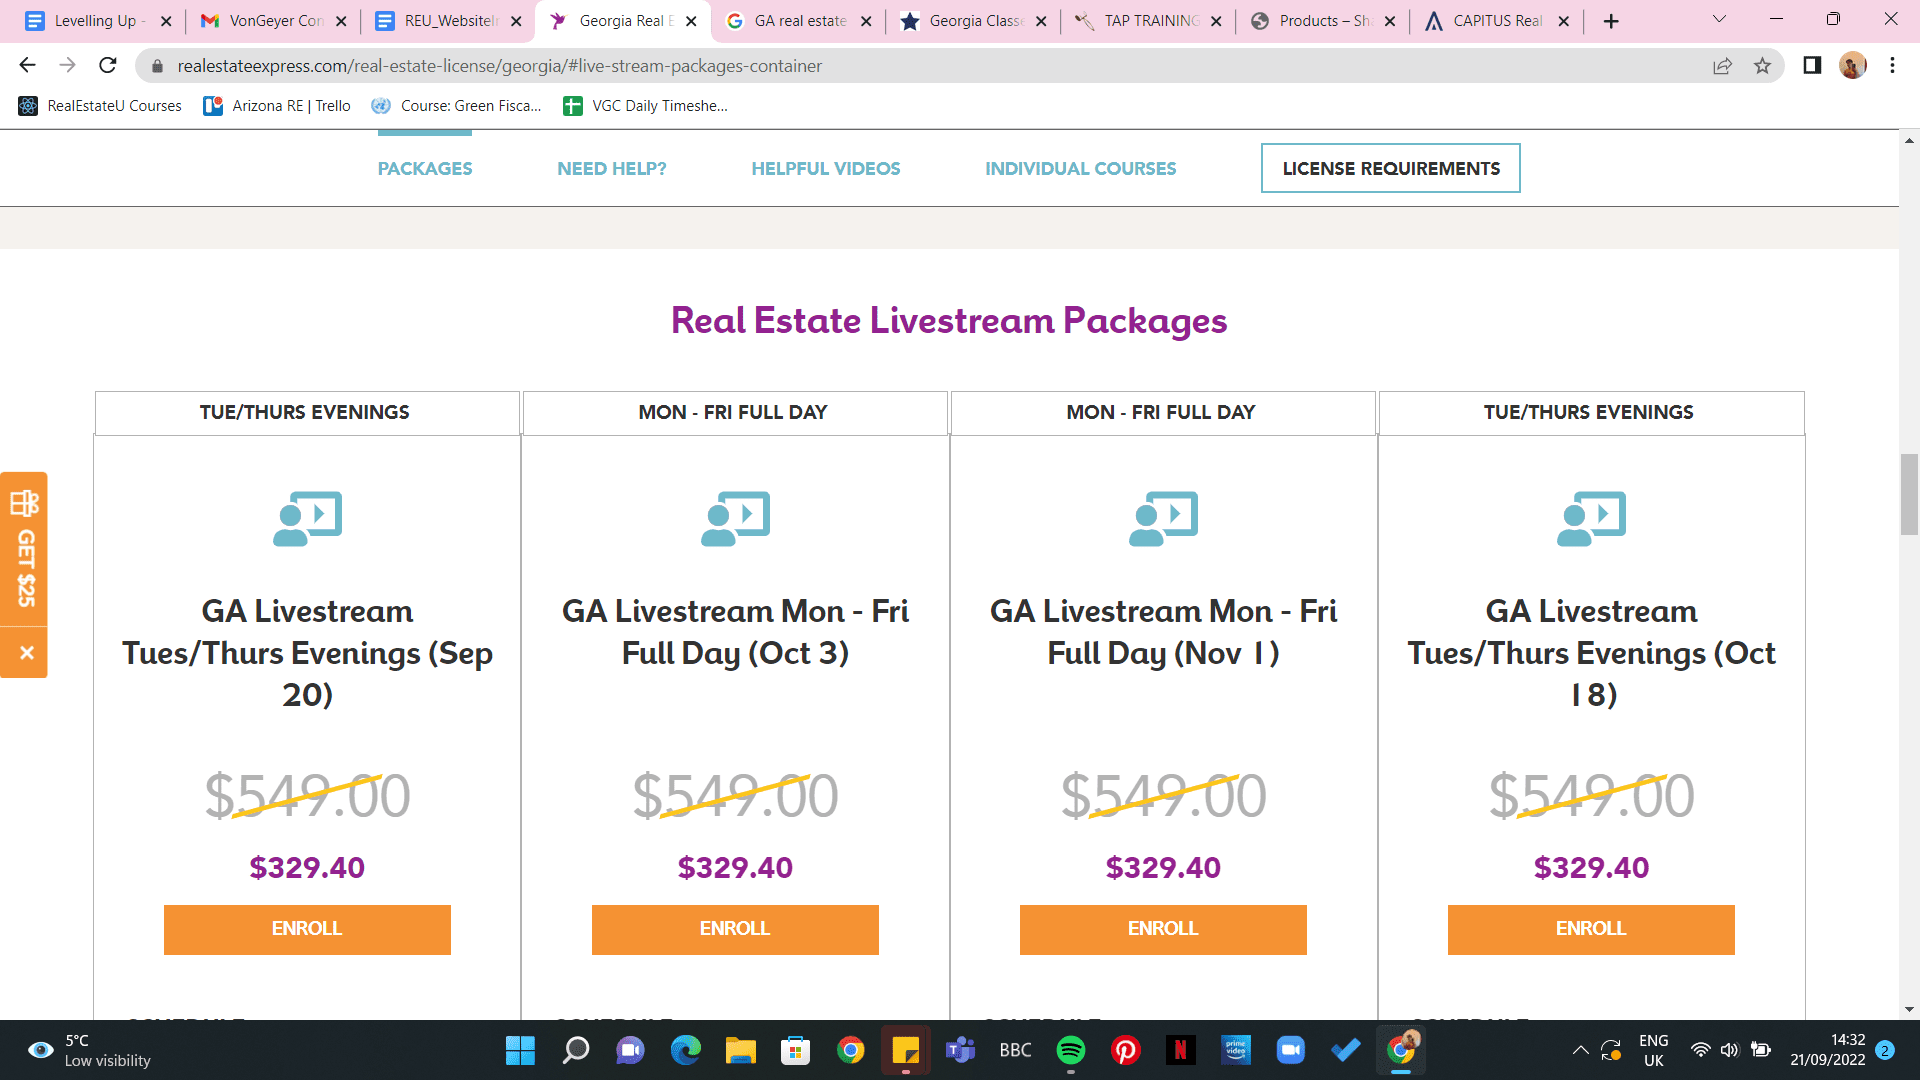 Advertisement for the Georgia Real Estate Livestream Packages from RealEstateExpress